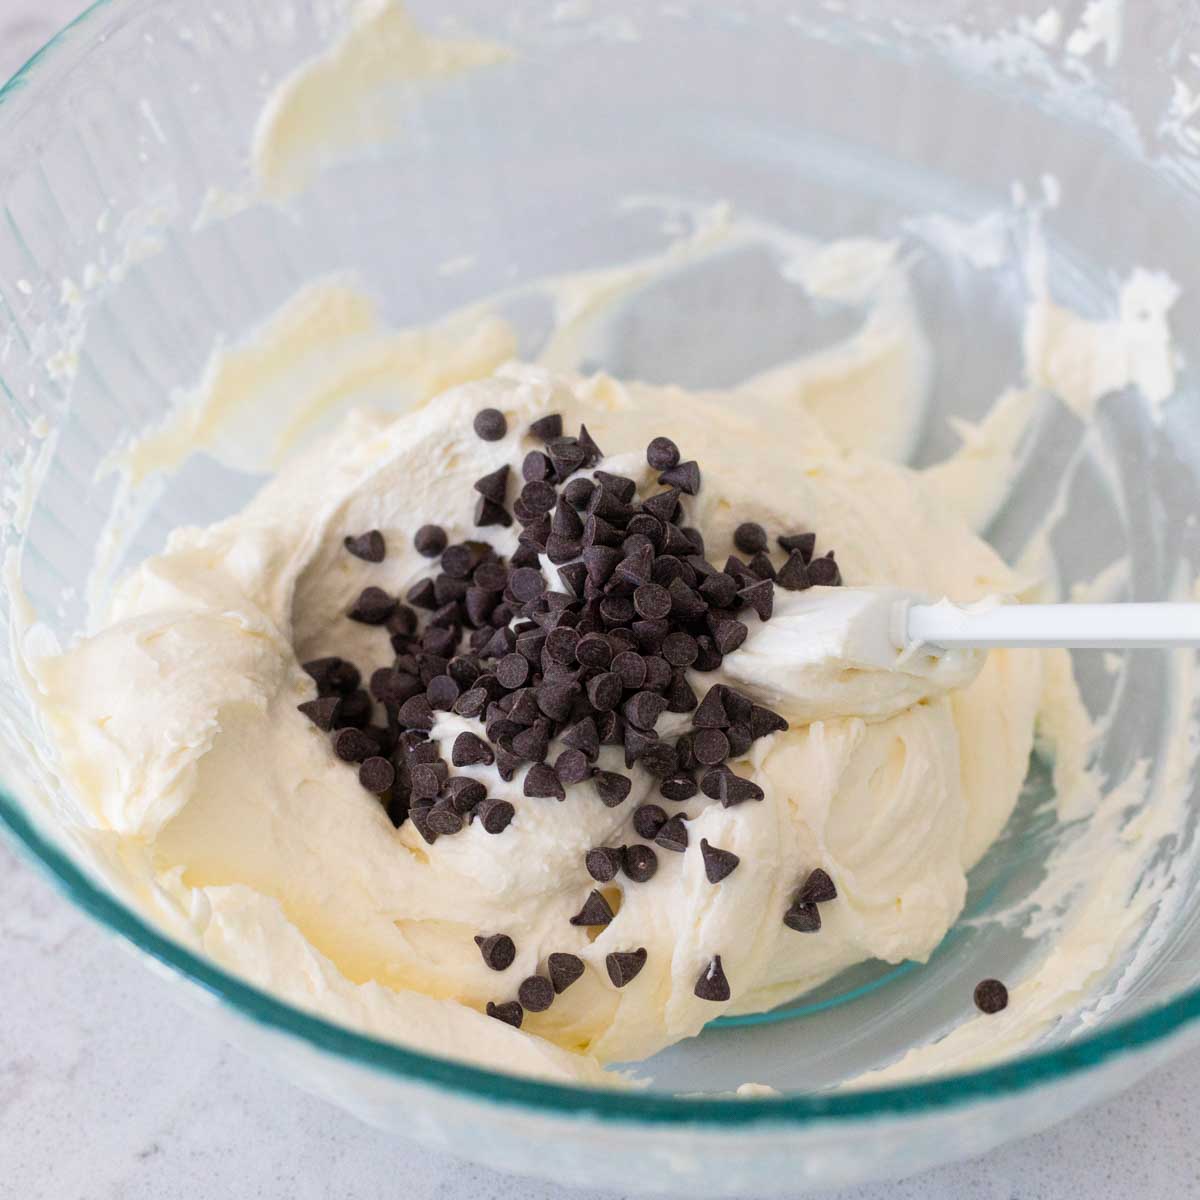 The mini chocolate chips have been added to the mixing bowl.